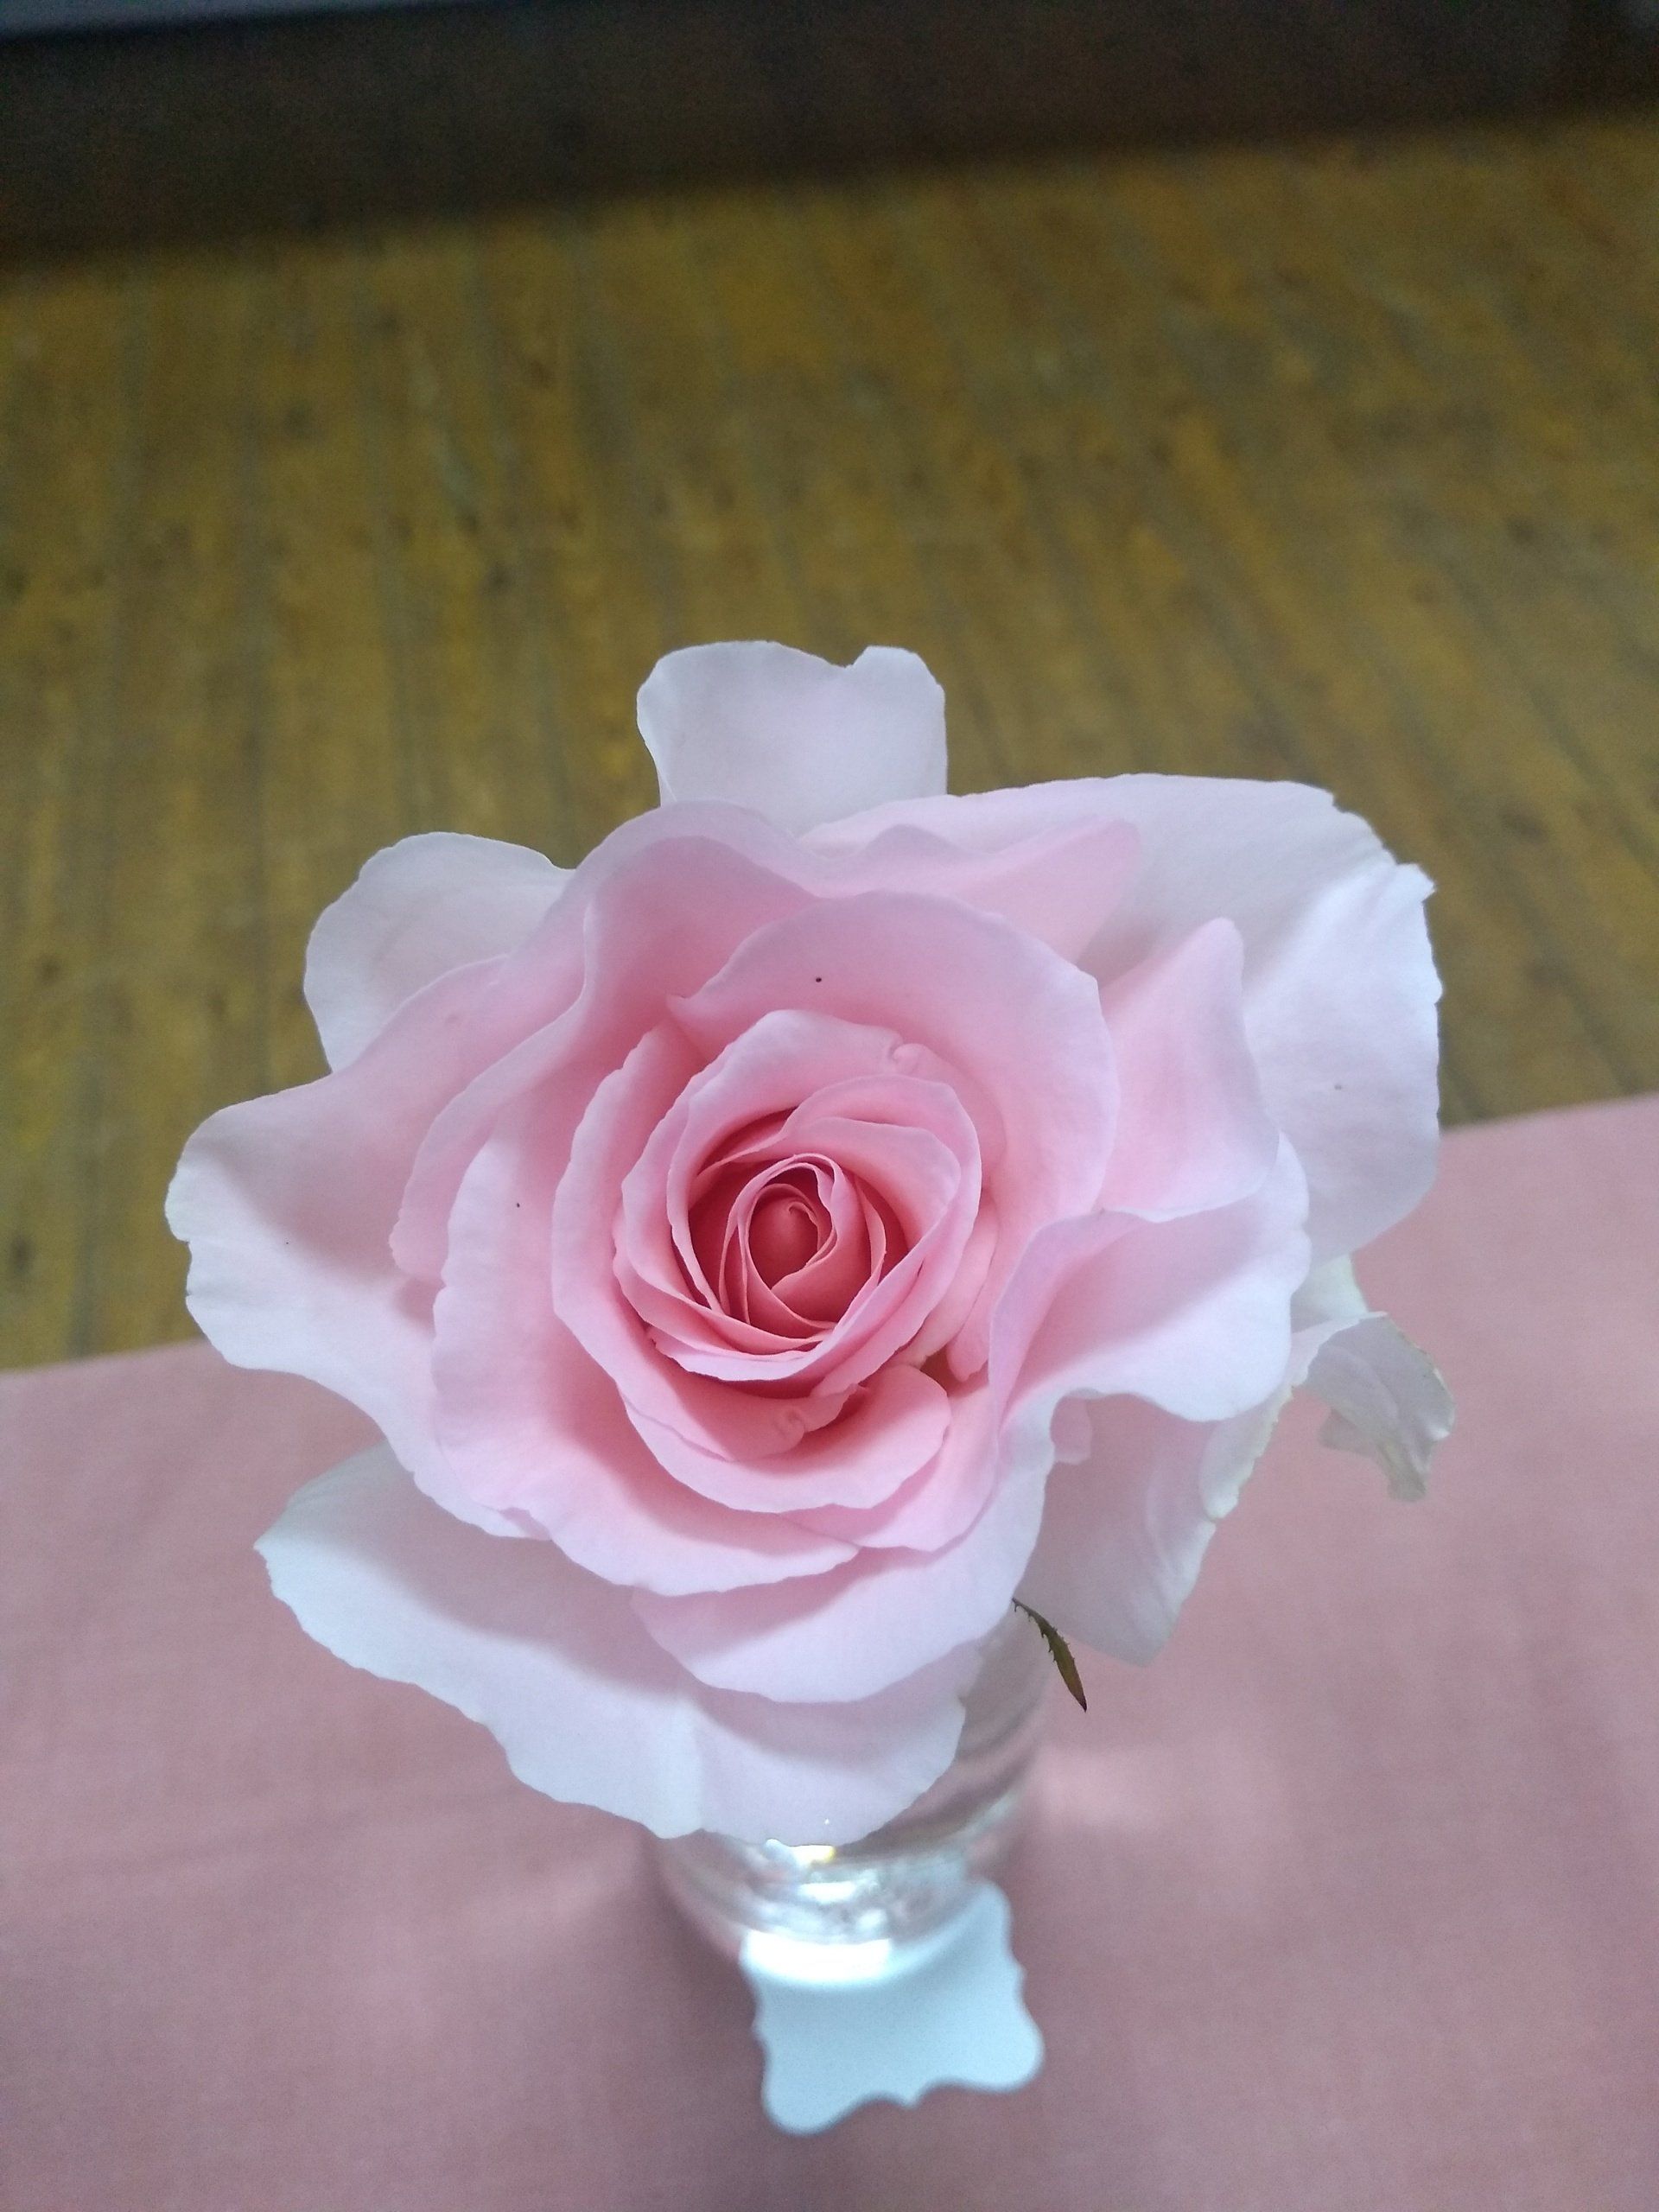 3rd prize open pink flower